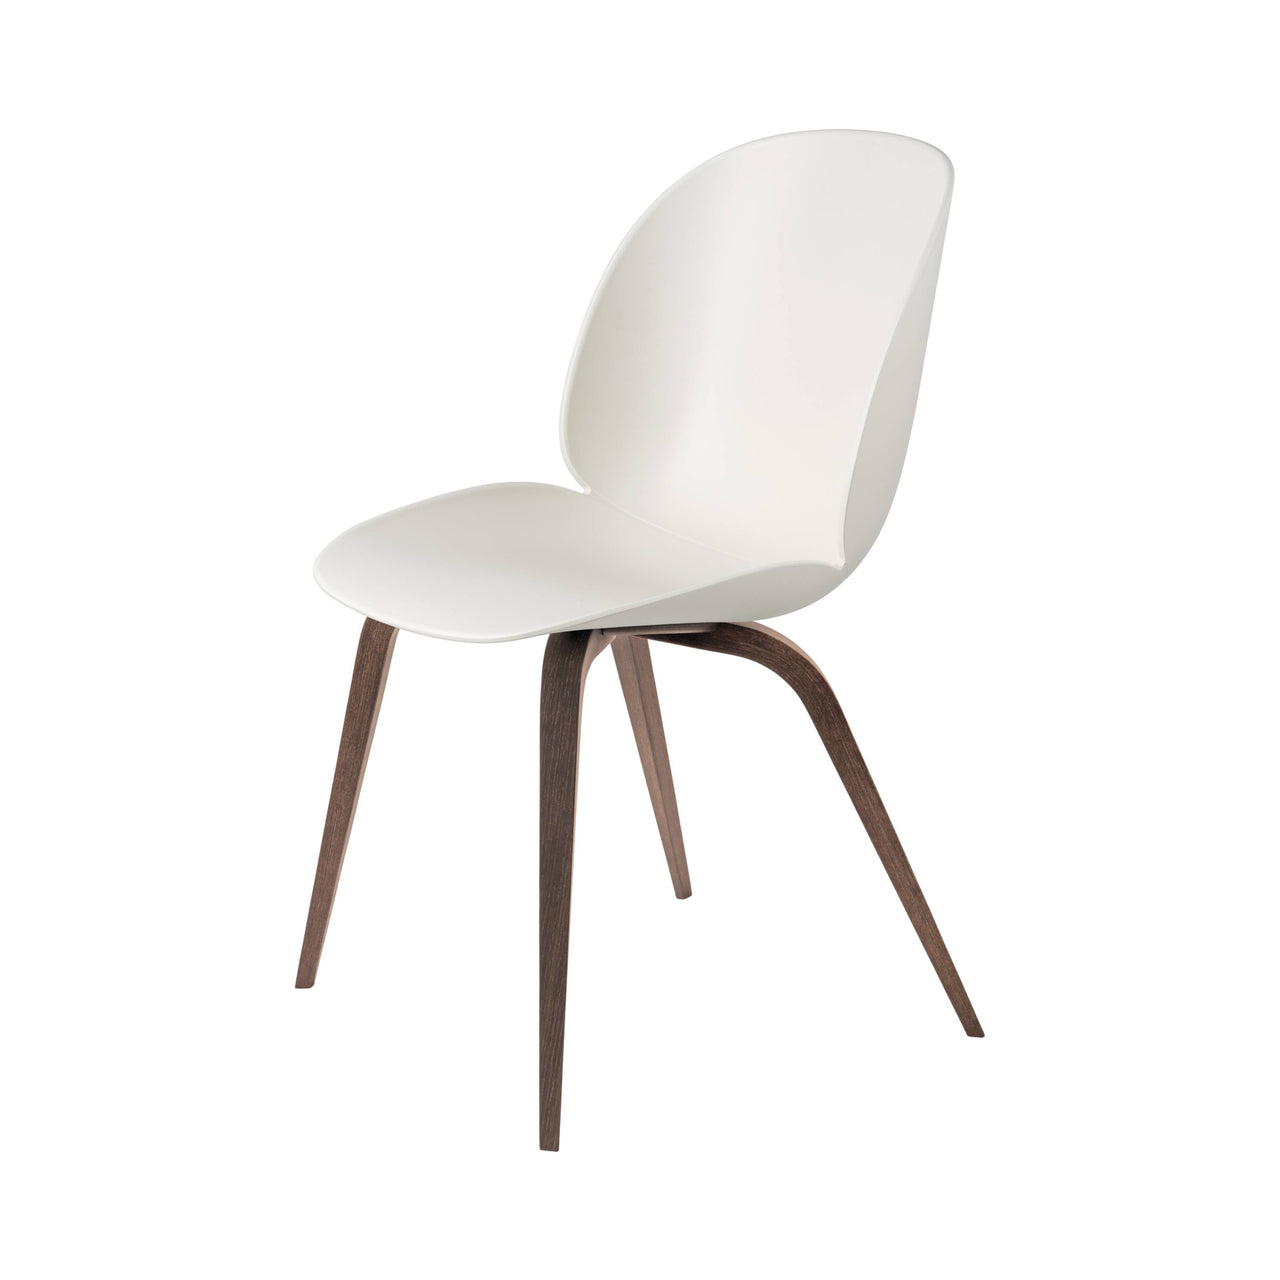 Beetle Dining Chair: Wood Base + Alabaster White + American Walnut